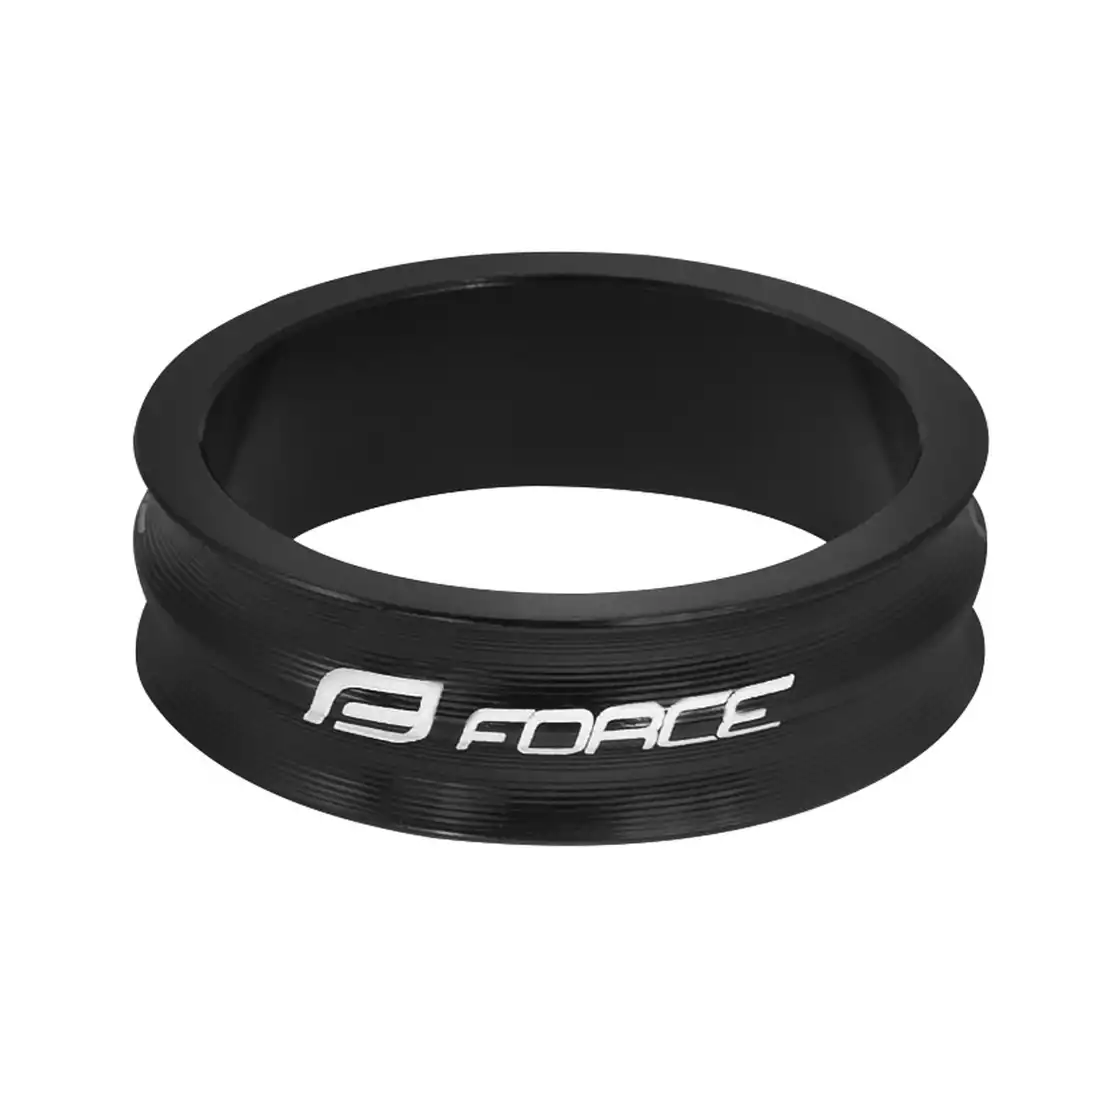 FORCE AHEAD Pad for bicycle rudders 1 1/8“, 10mm, black